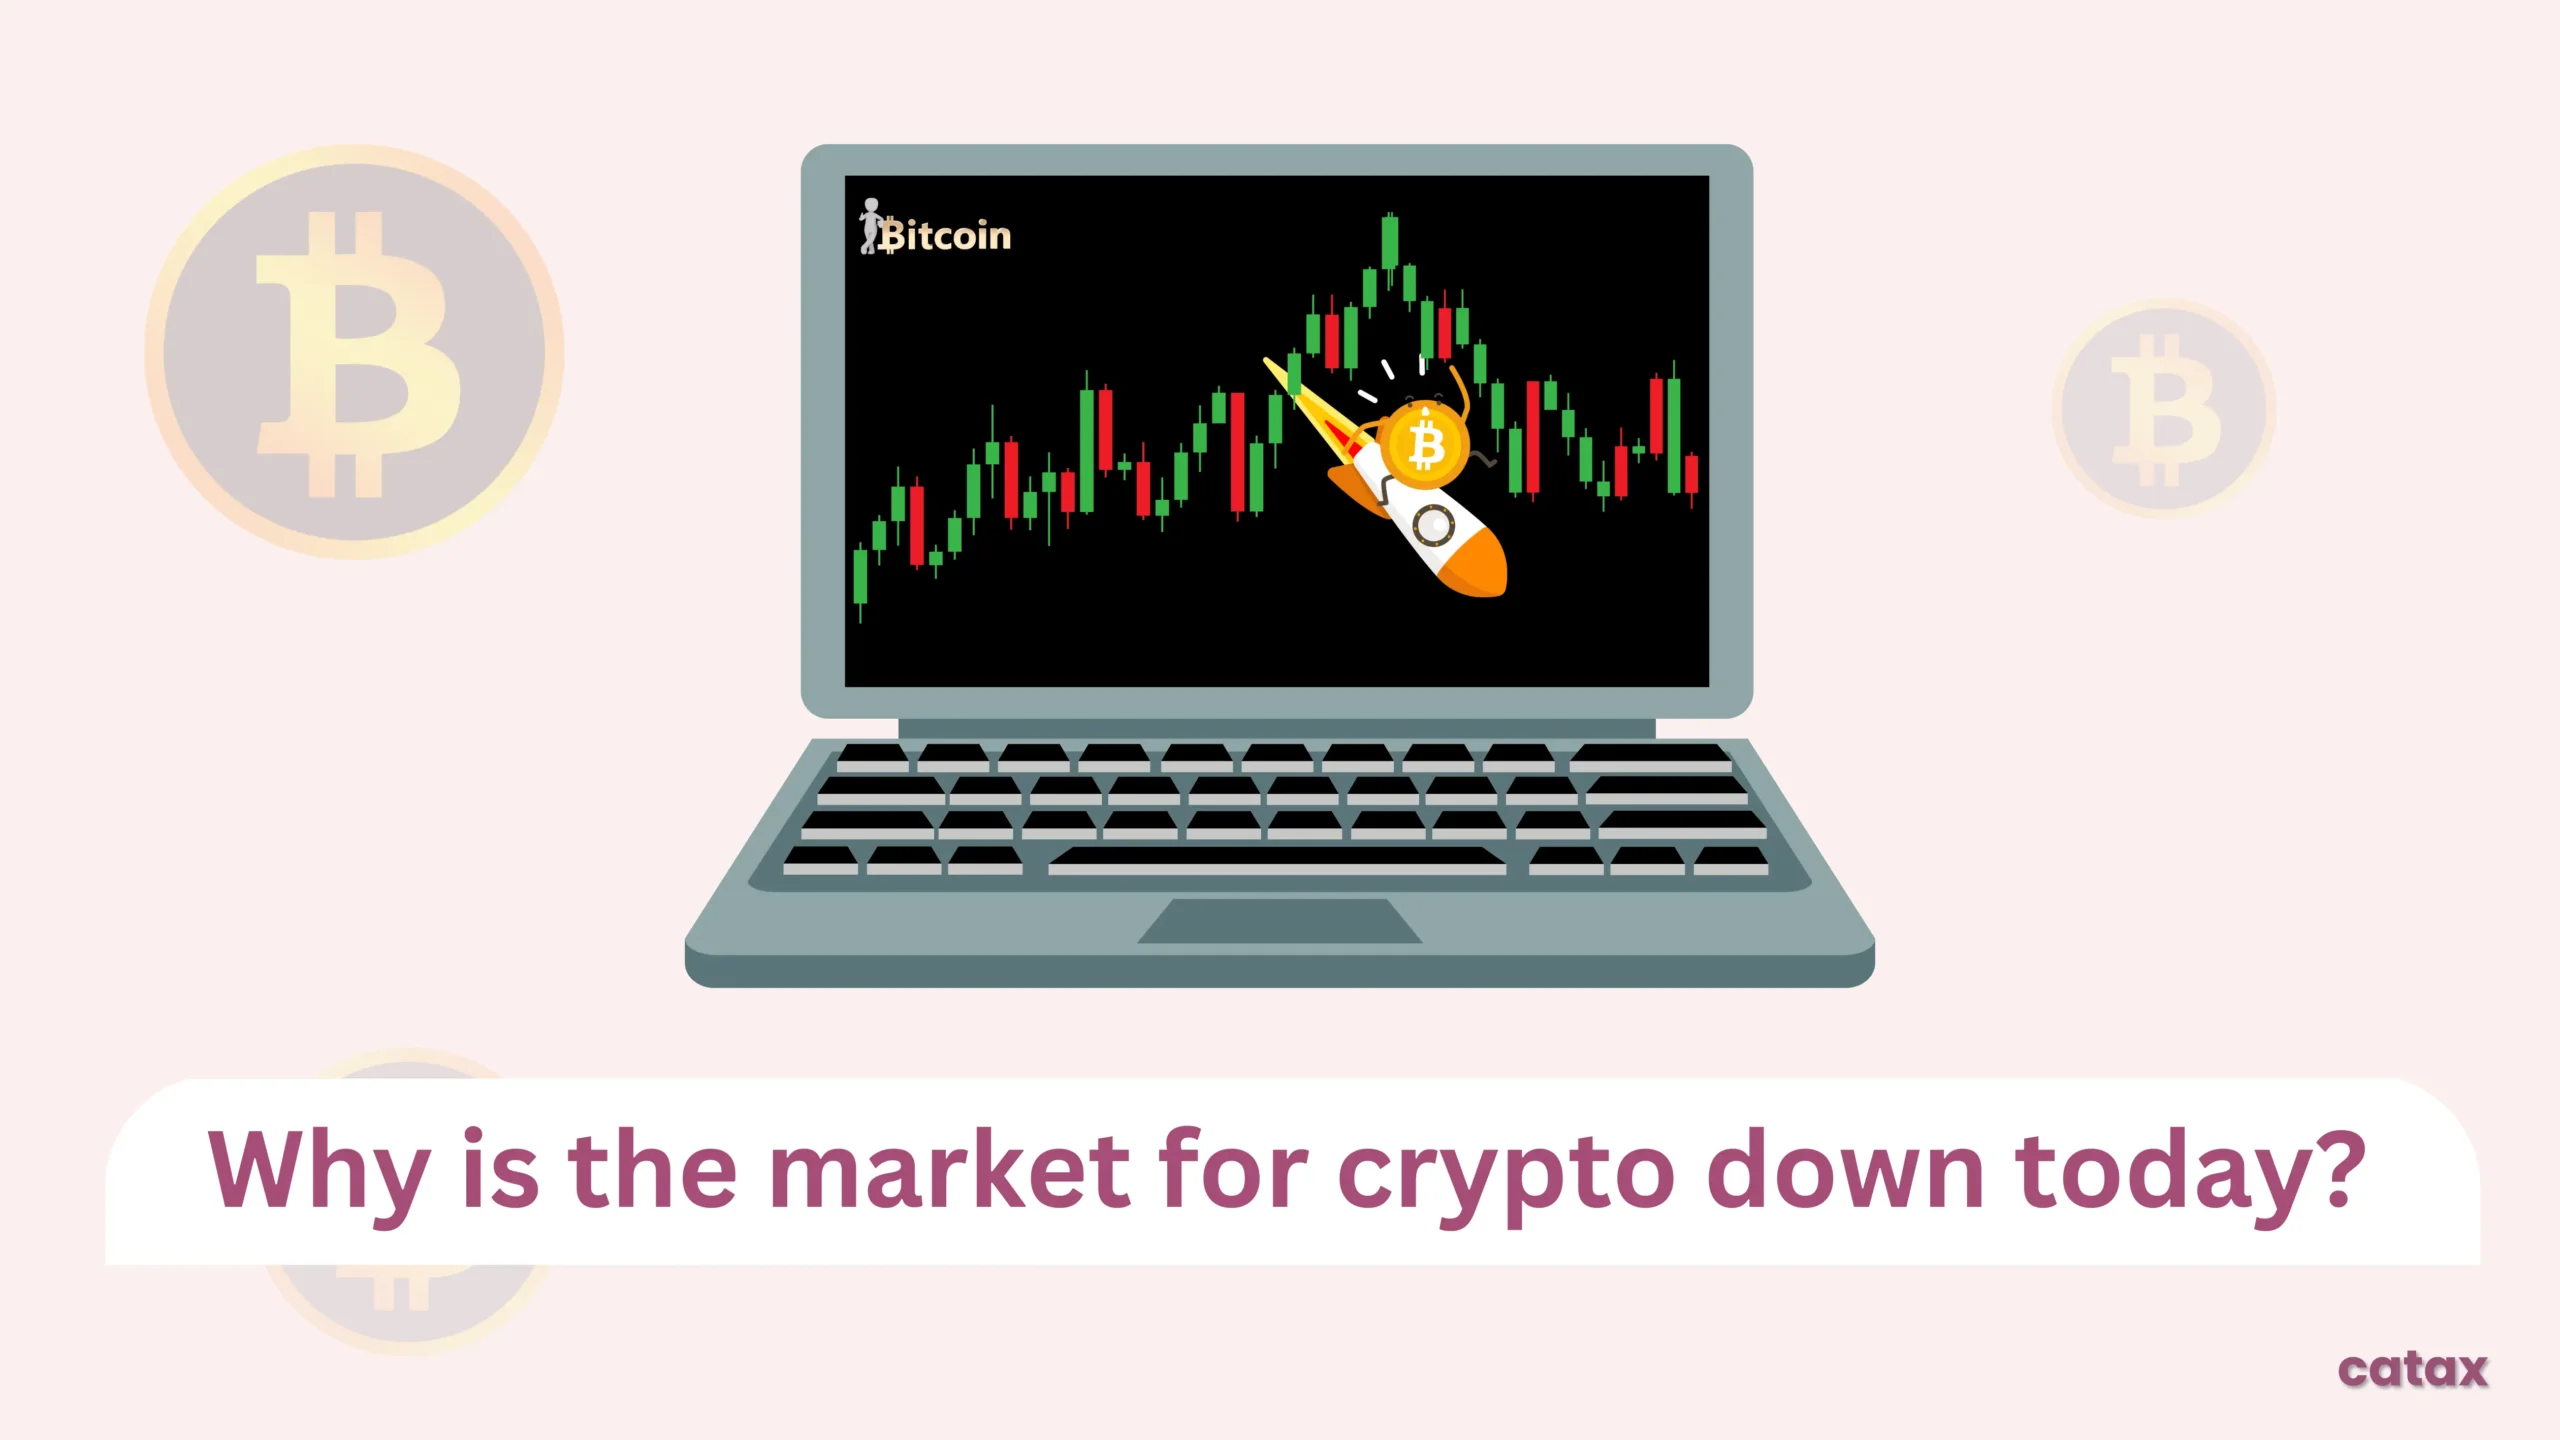 Why is the market for crypto down today?